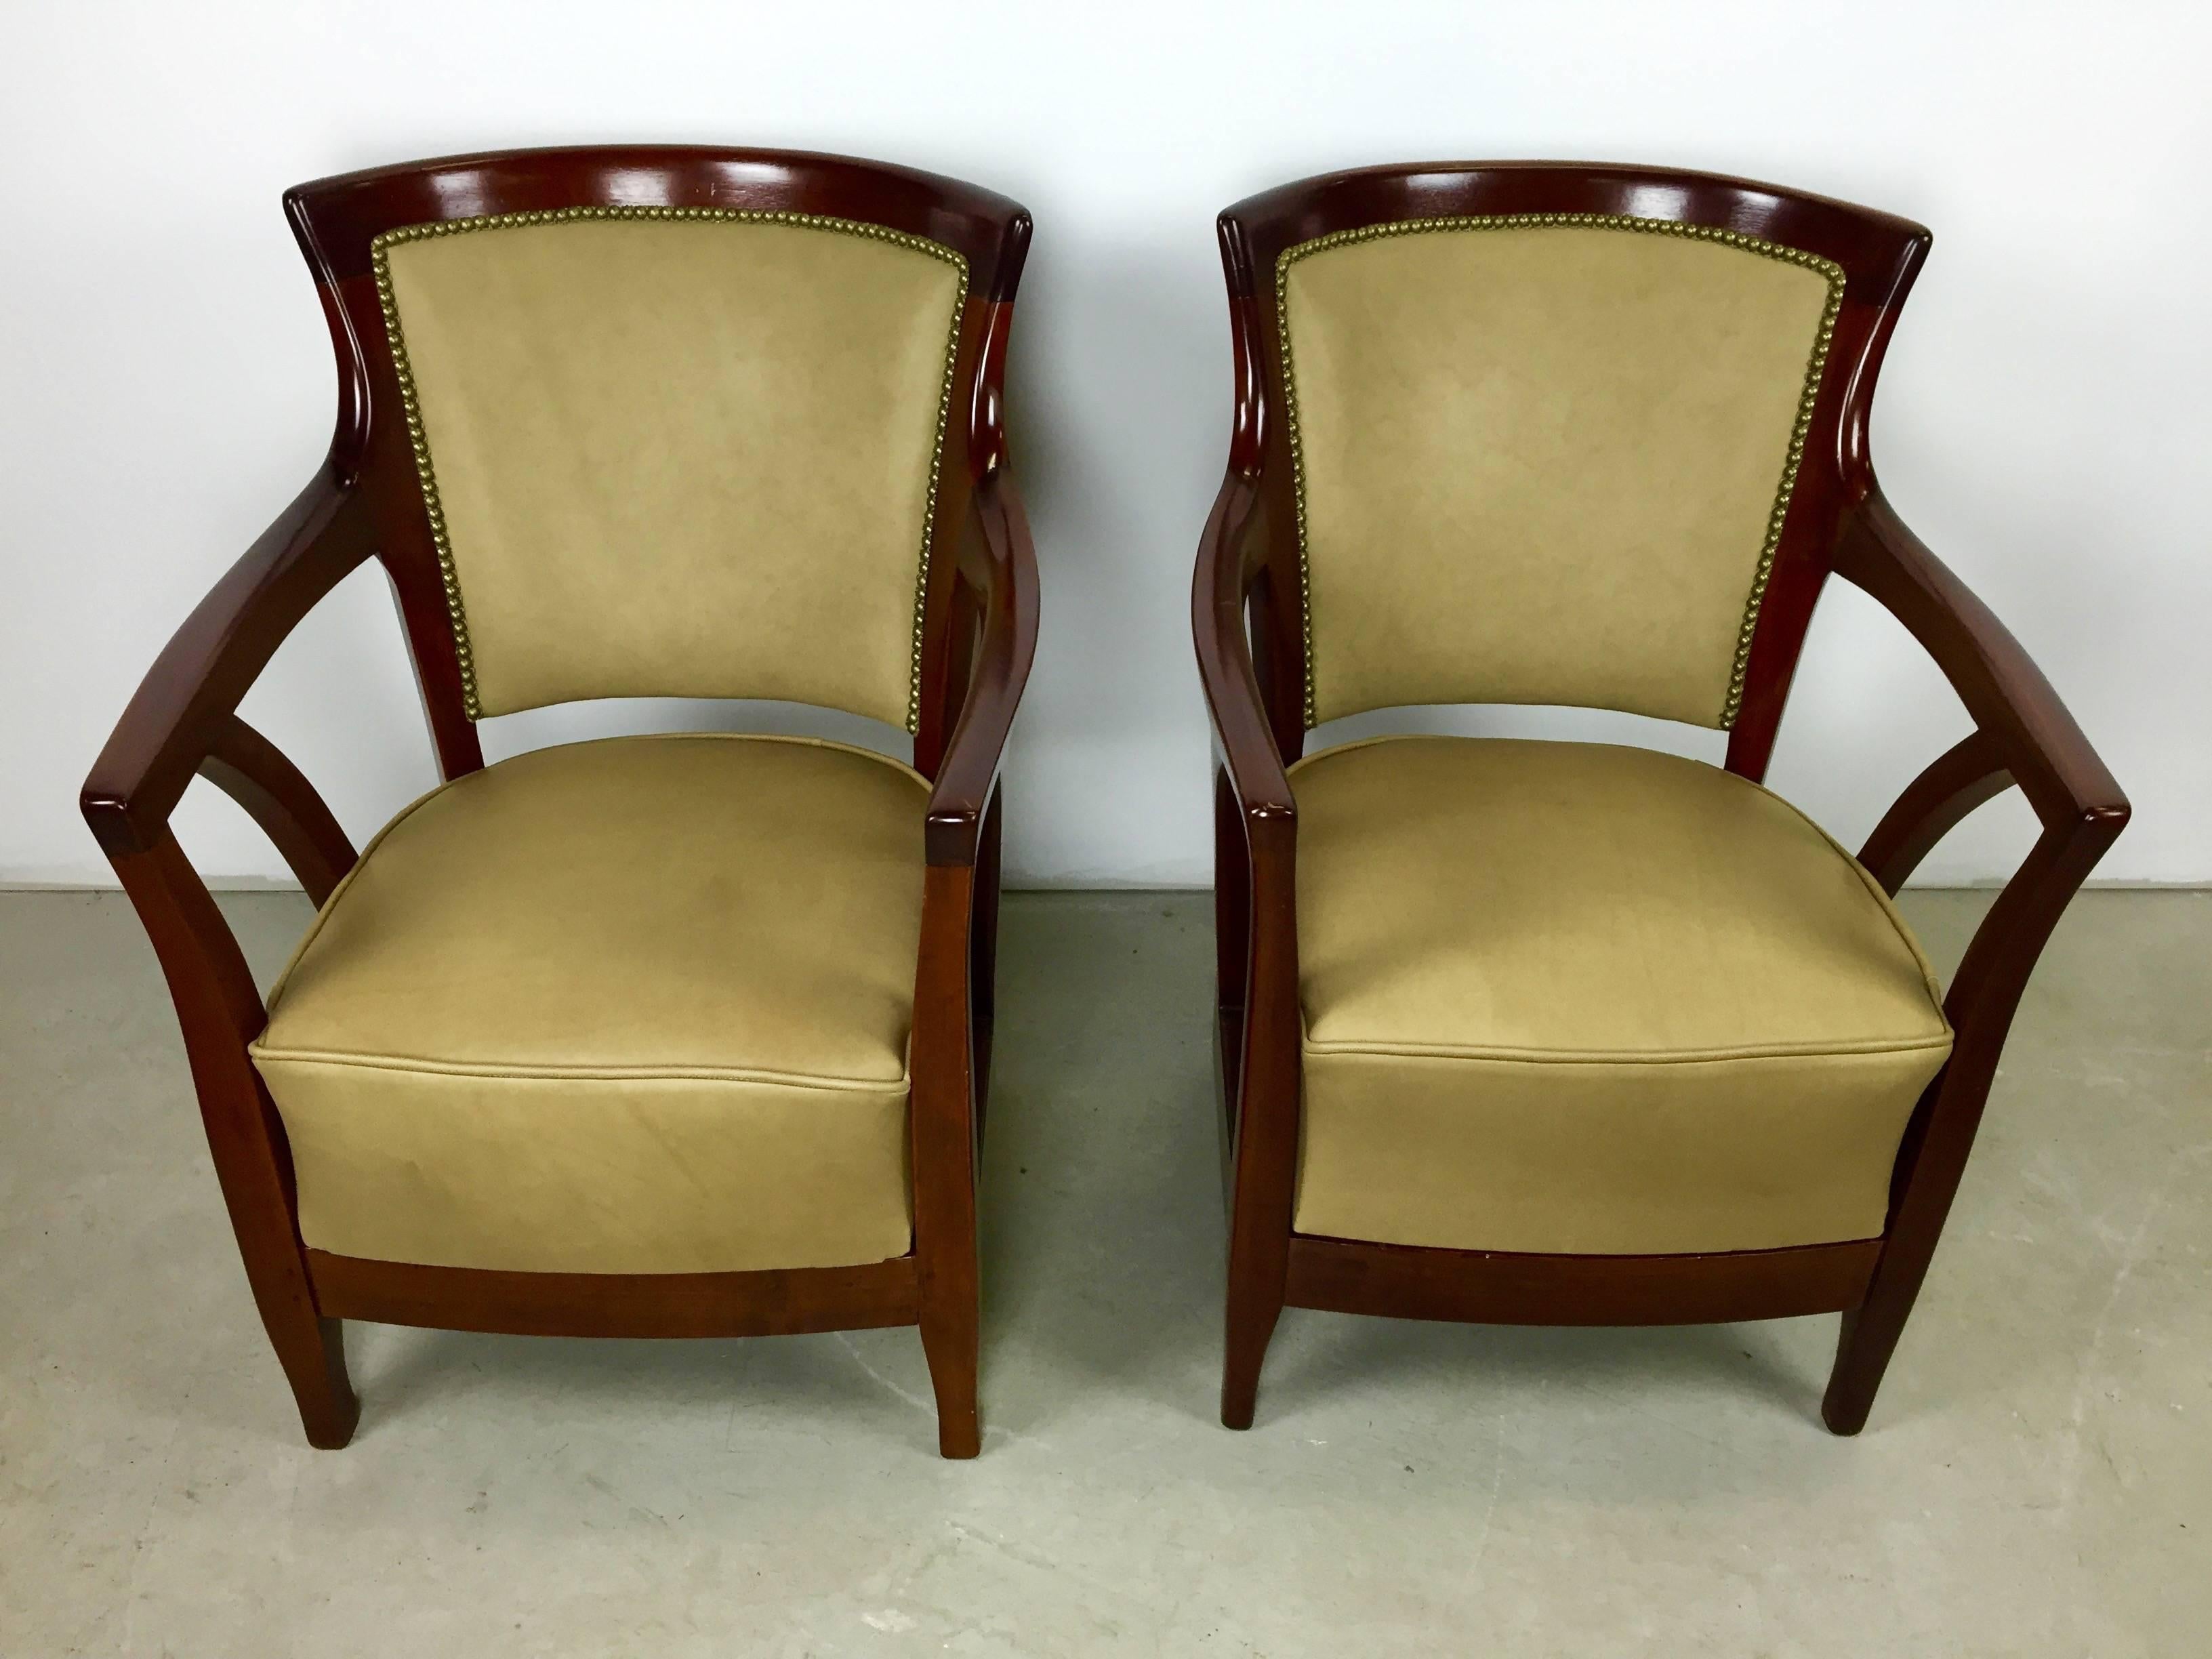 Pair of Walnut and Leather Vienna Secessionist Club Chairs 1